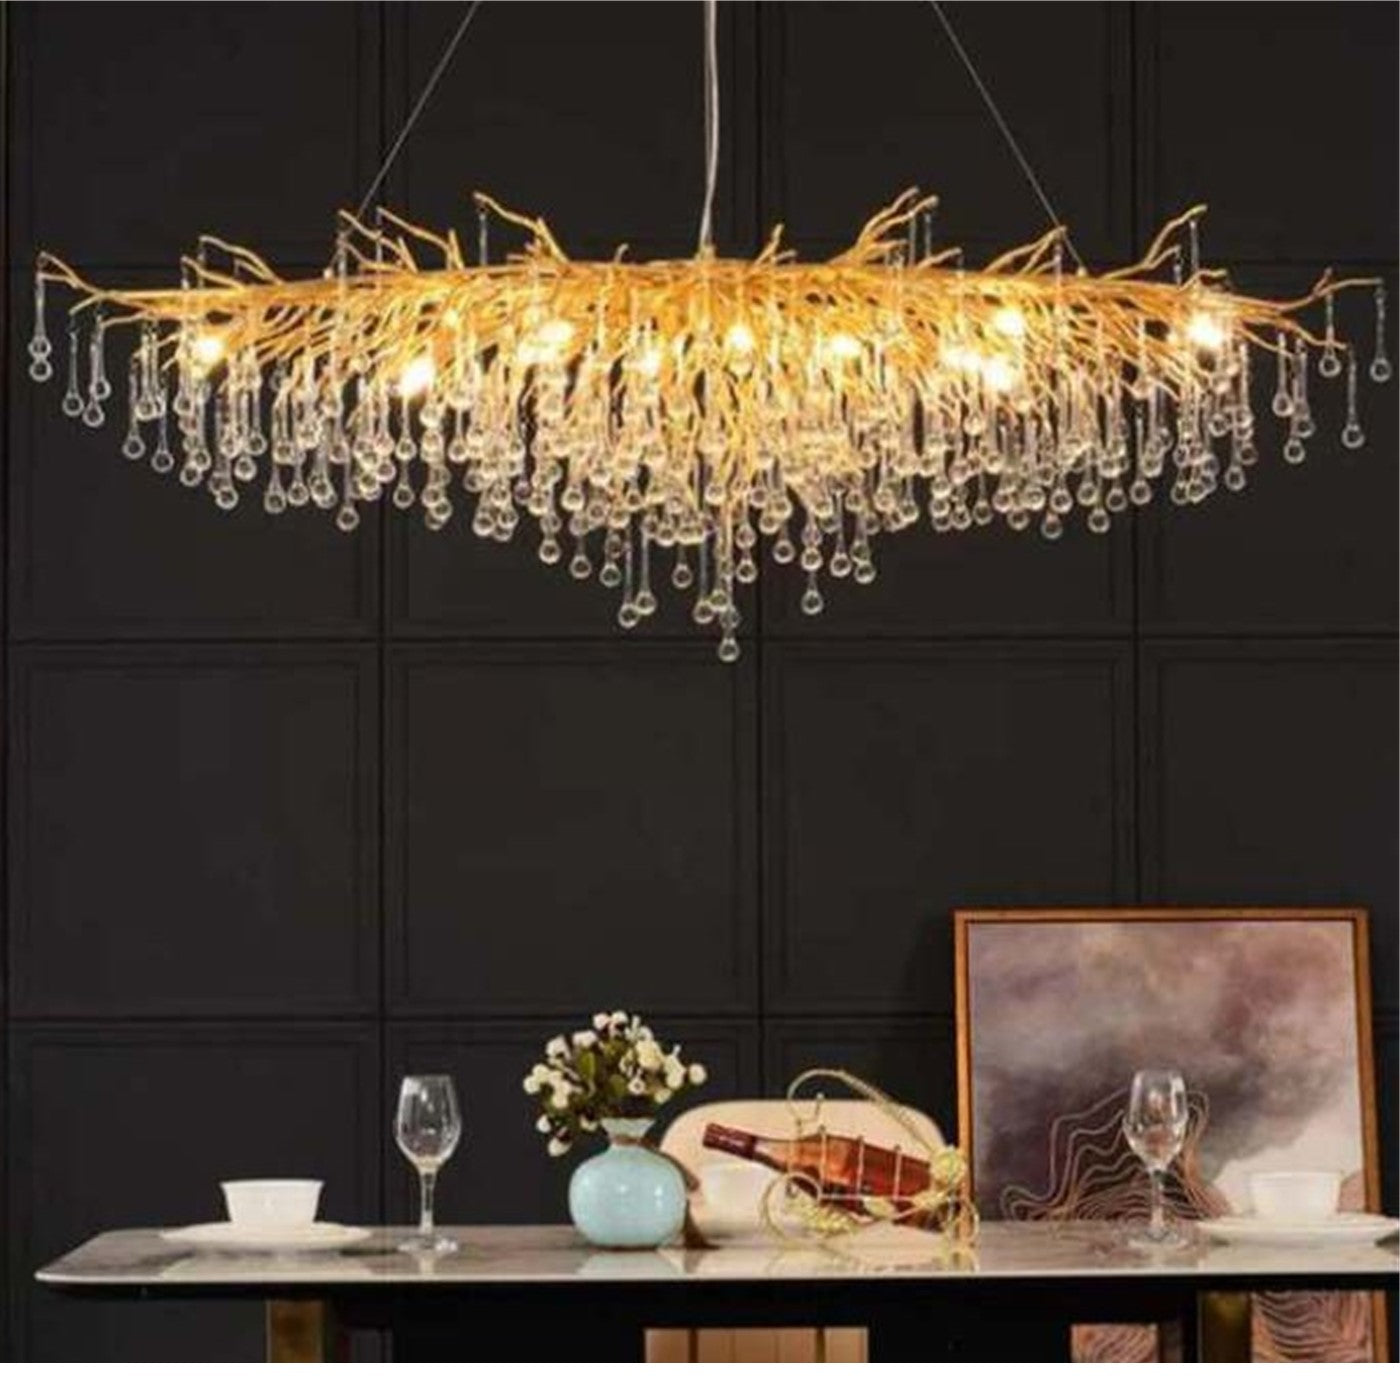 8002-1200 Crystal Chandeliers